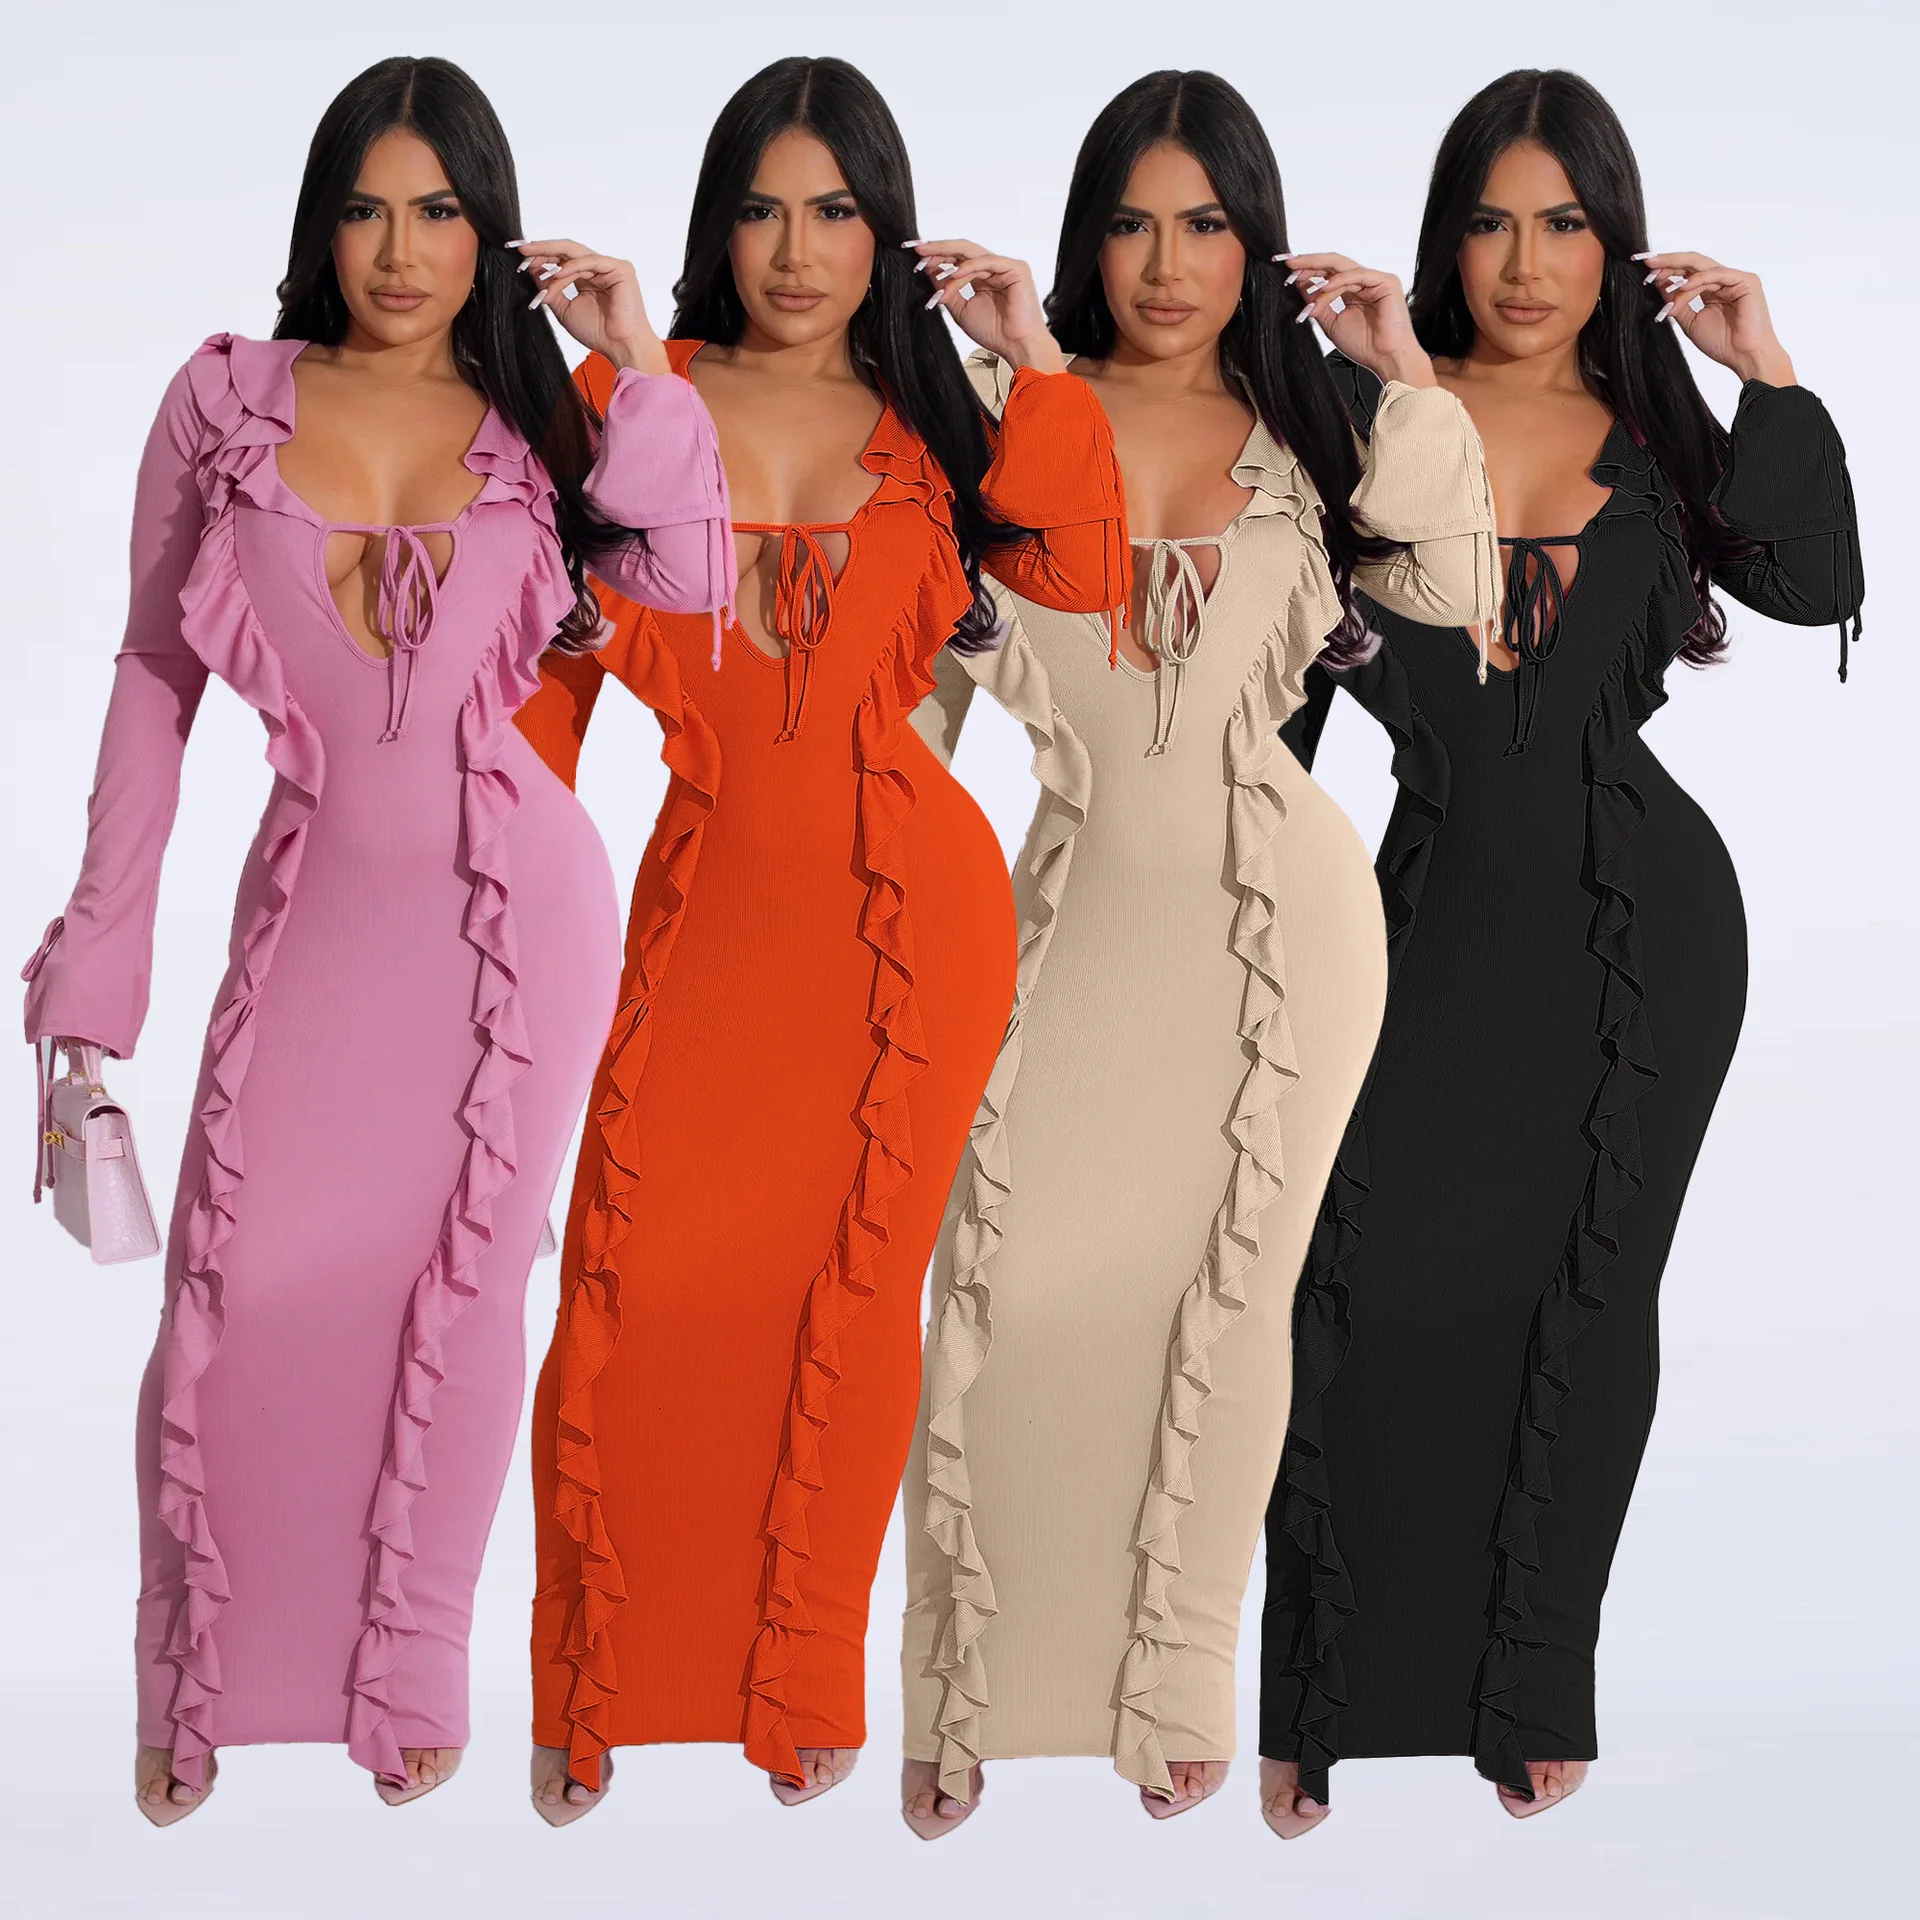 

Hot Style Women Ruffles Party Dress Sexy Deep V Neck Lace-up Long Sleeves Stretchy Casual Sheath Dresses Drop Shipping